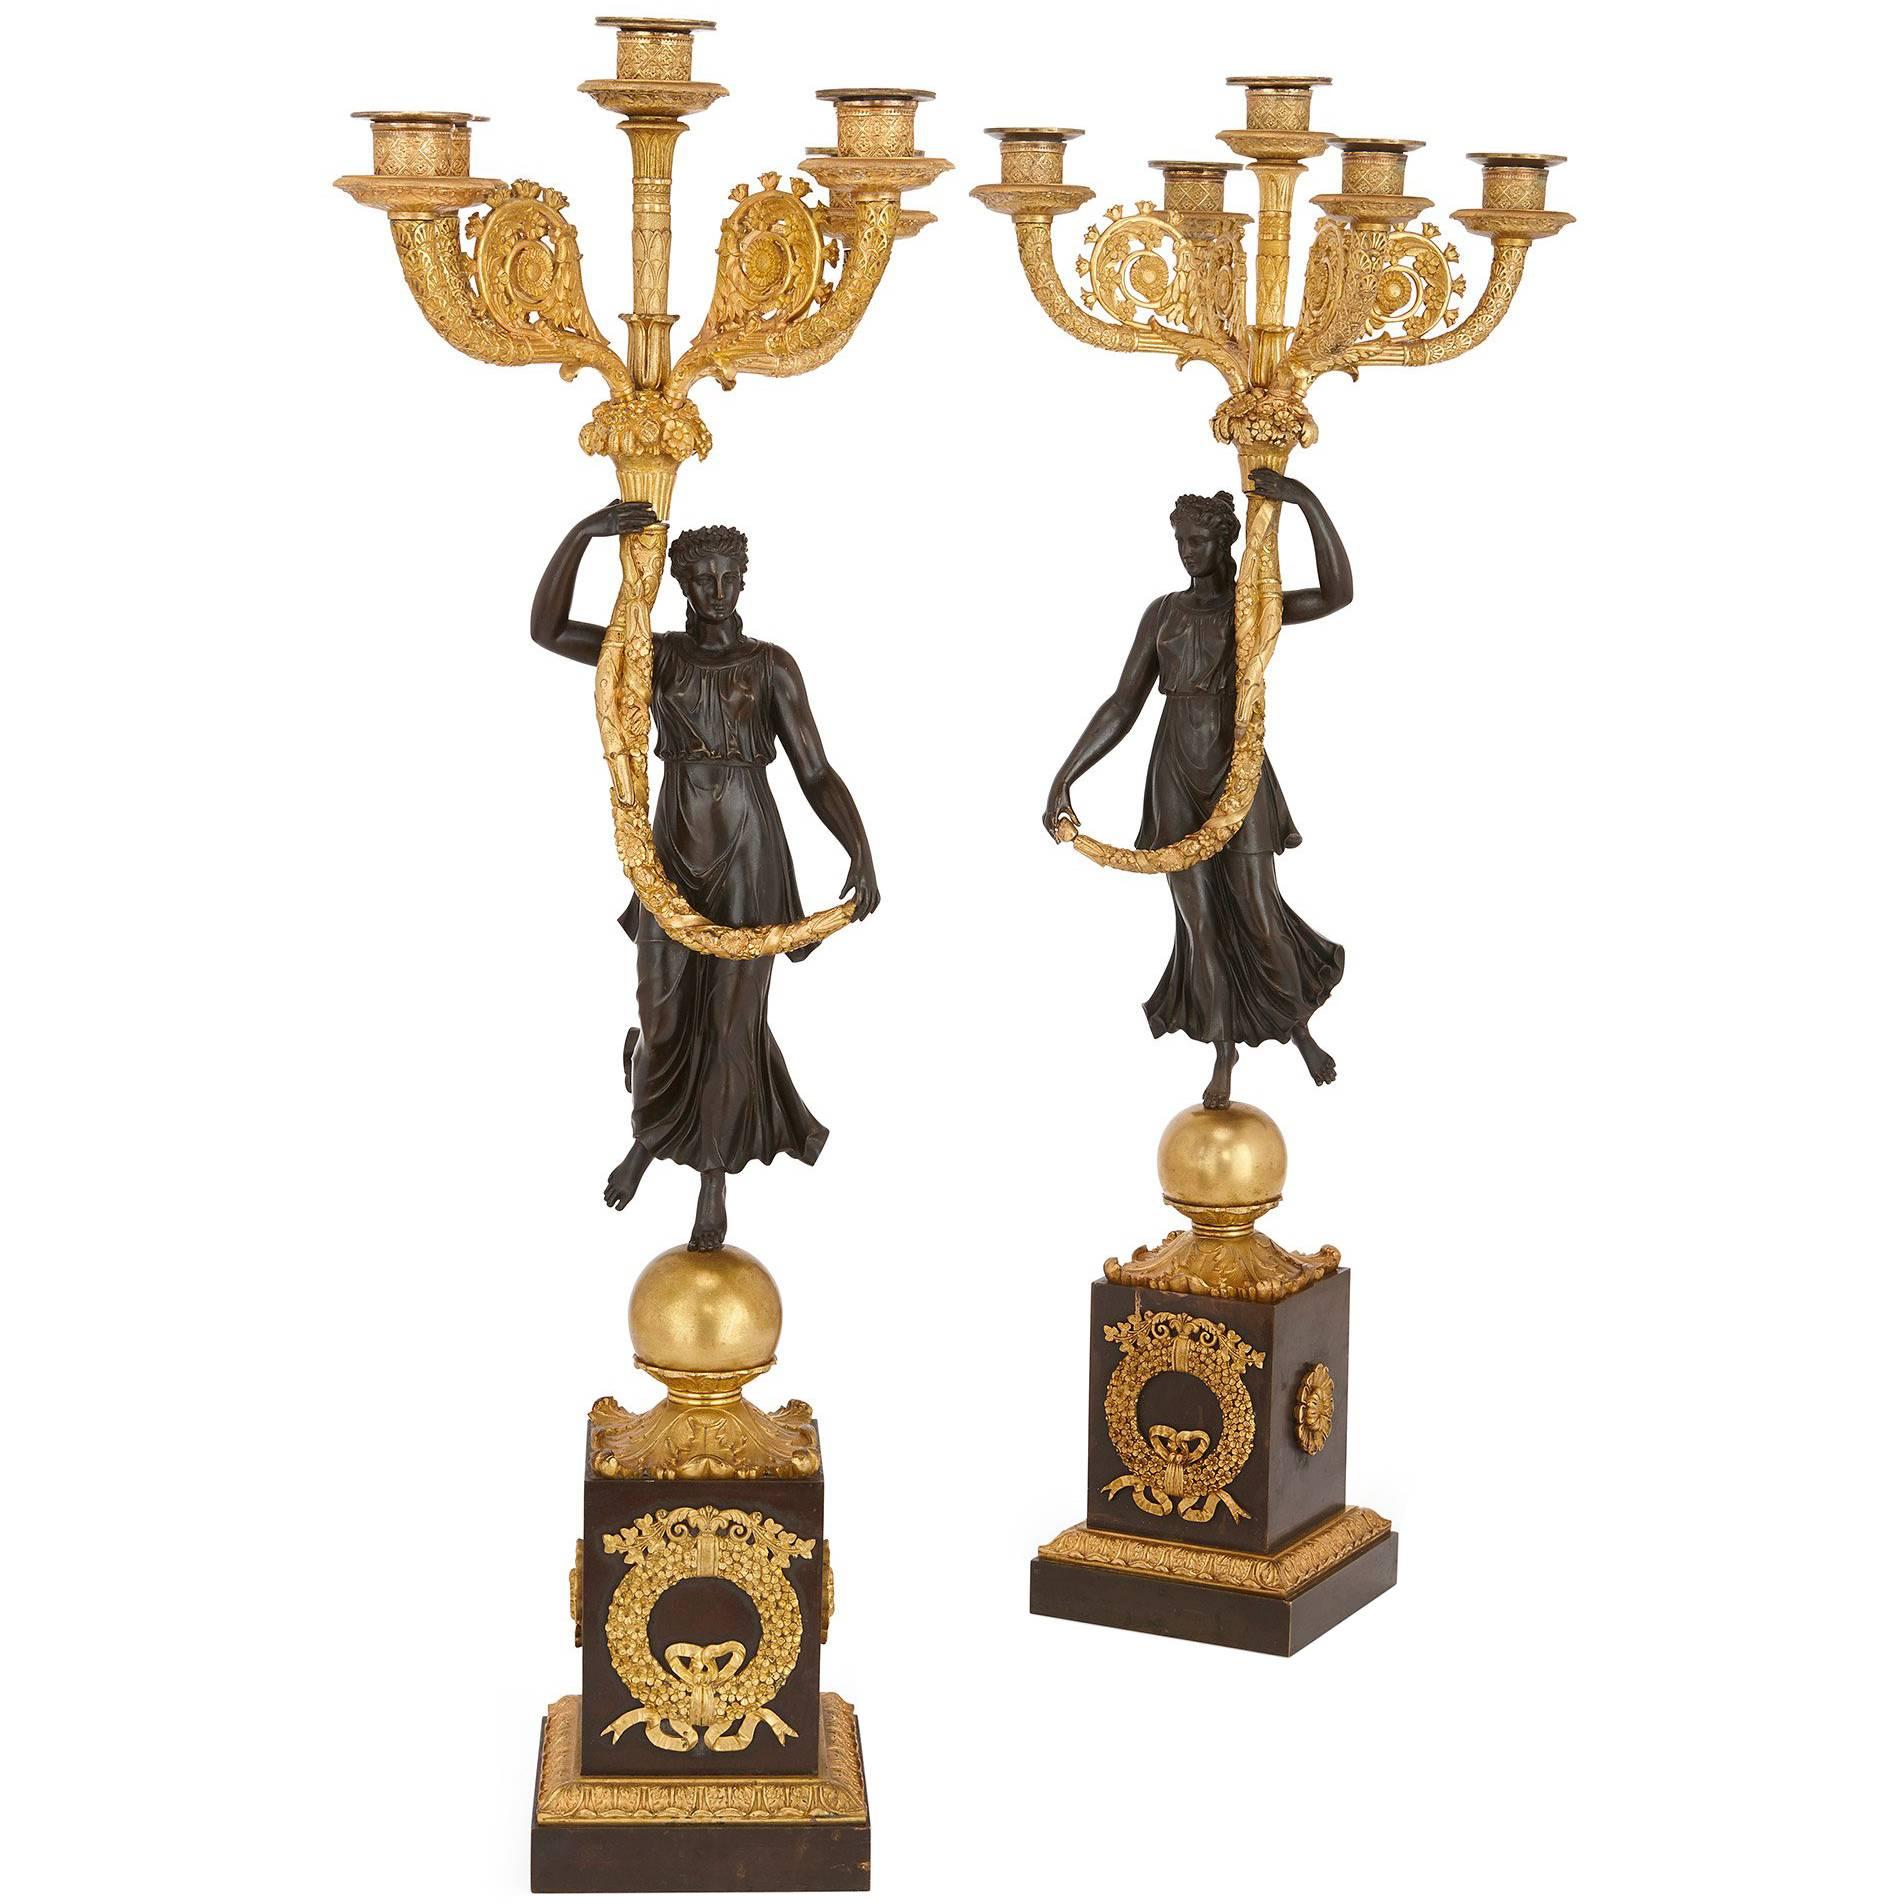 Pair of Antique French Empire Period Ormolu and Patinated Bronze Candelabra For Sale